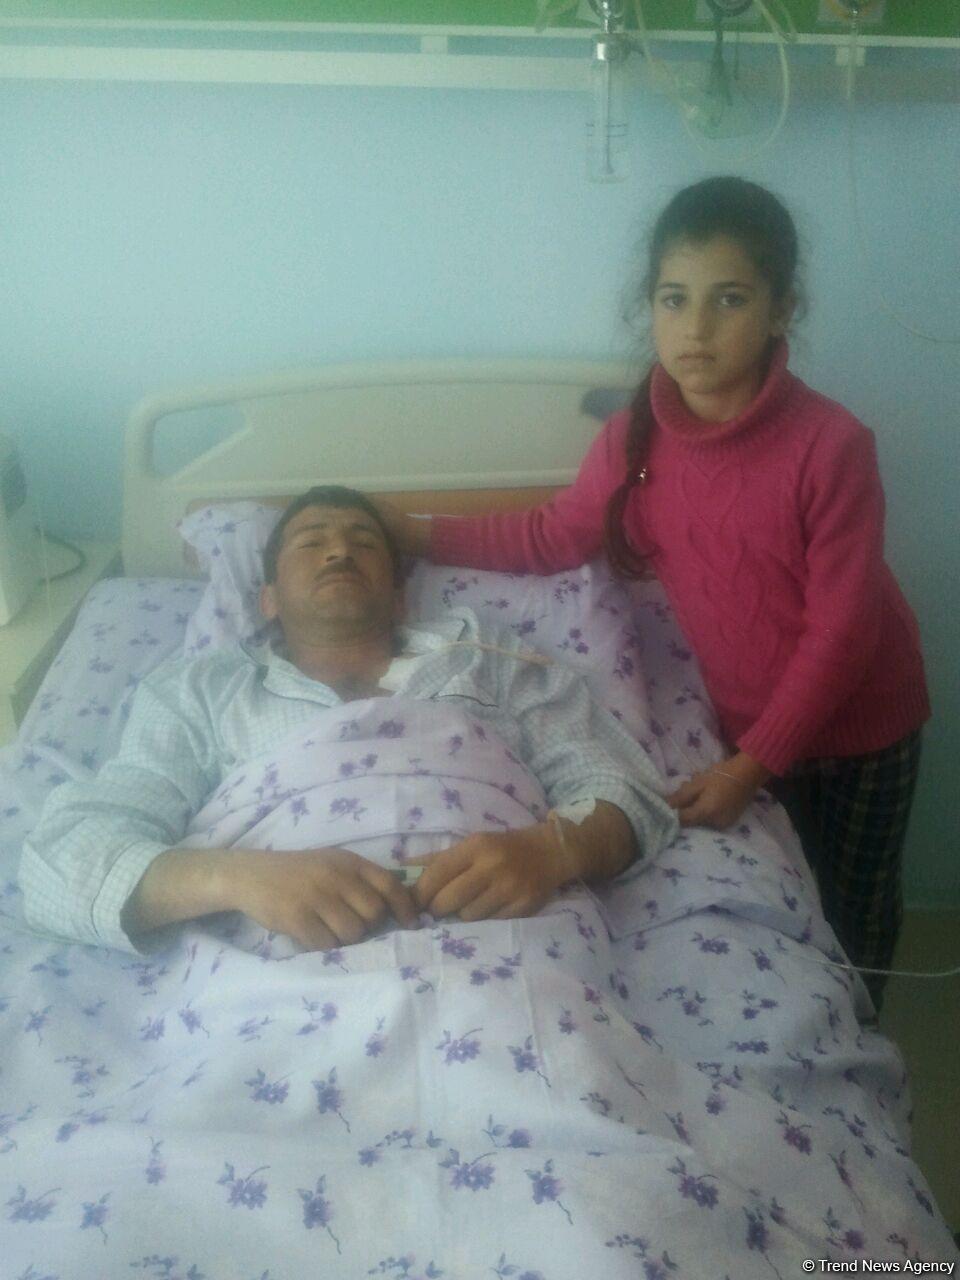 Resident of Azerbaijan’s Aghdam wounded as result of Armenia’s shelling